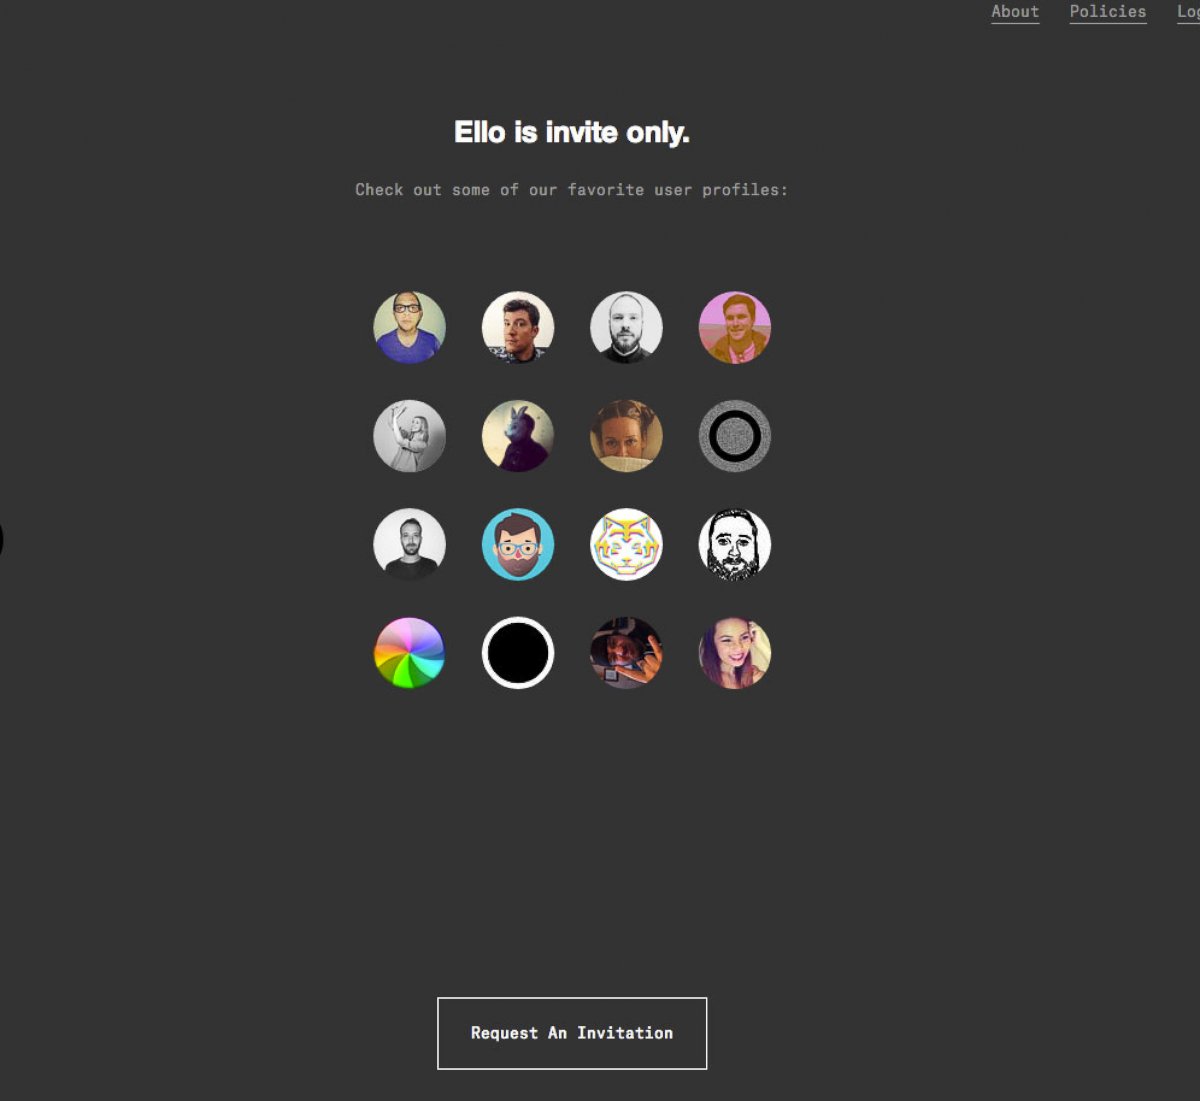 PHOTO: Ello is an invitation only social network without advertising.